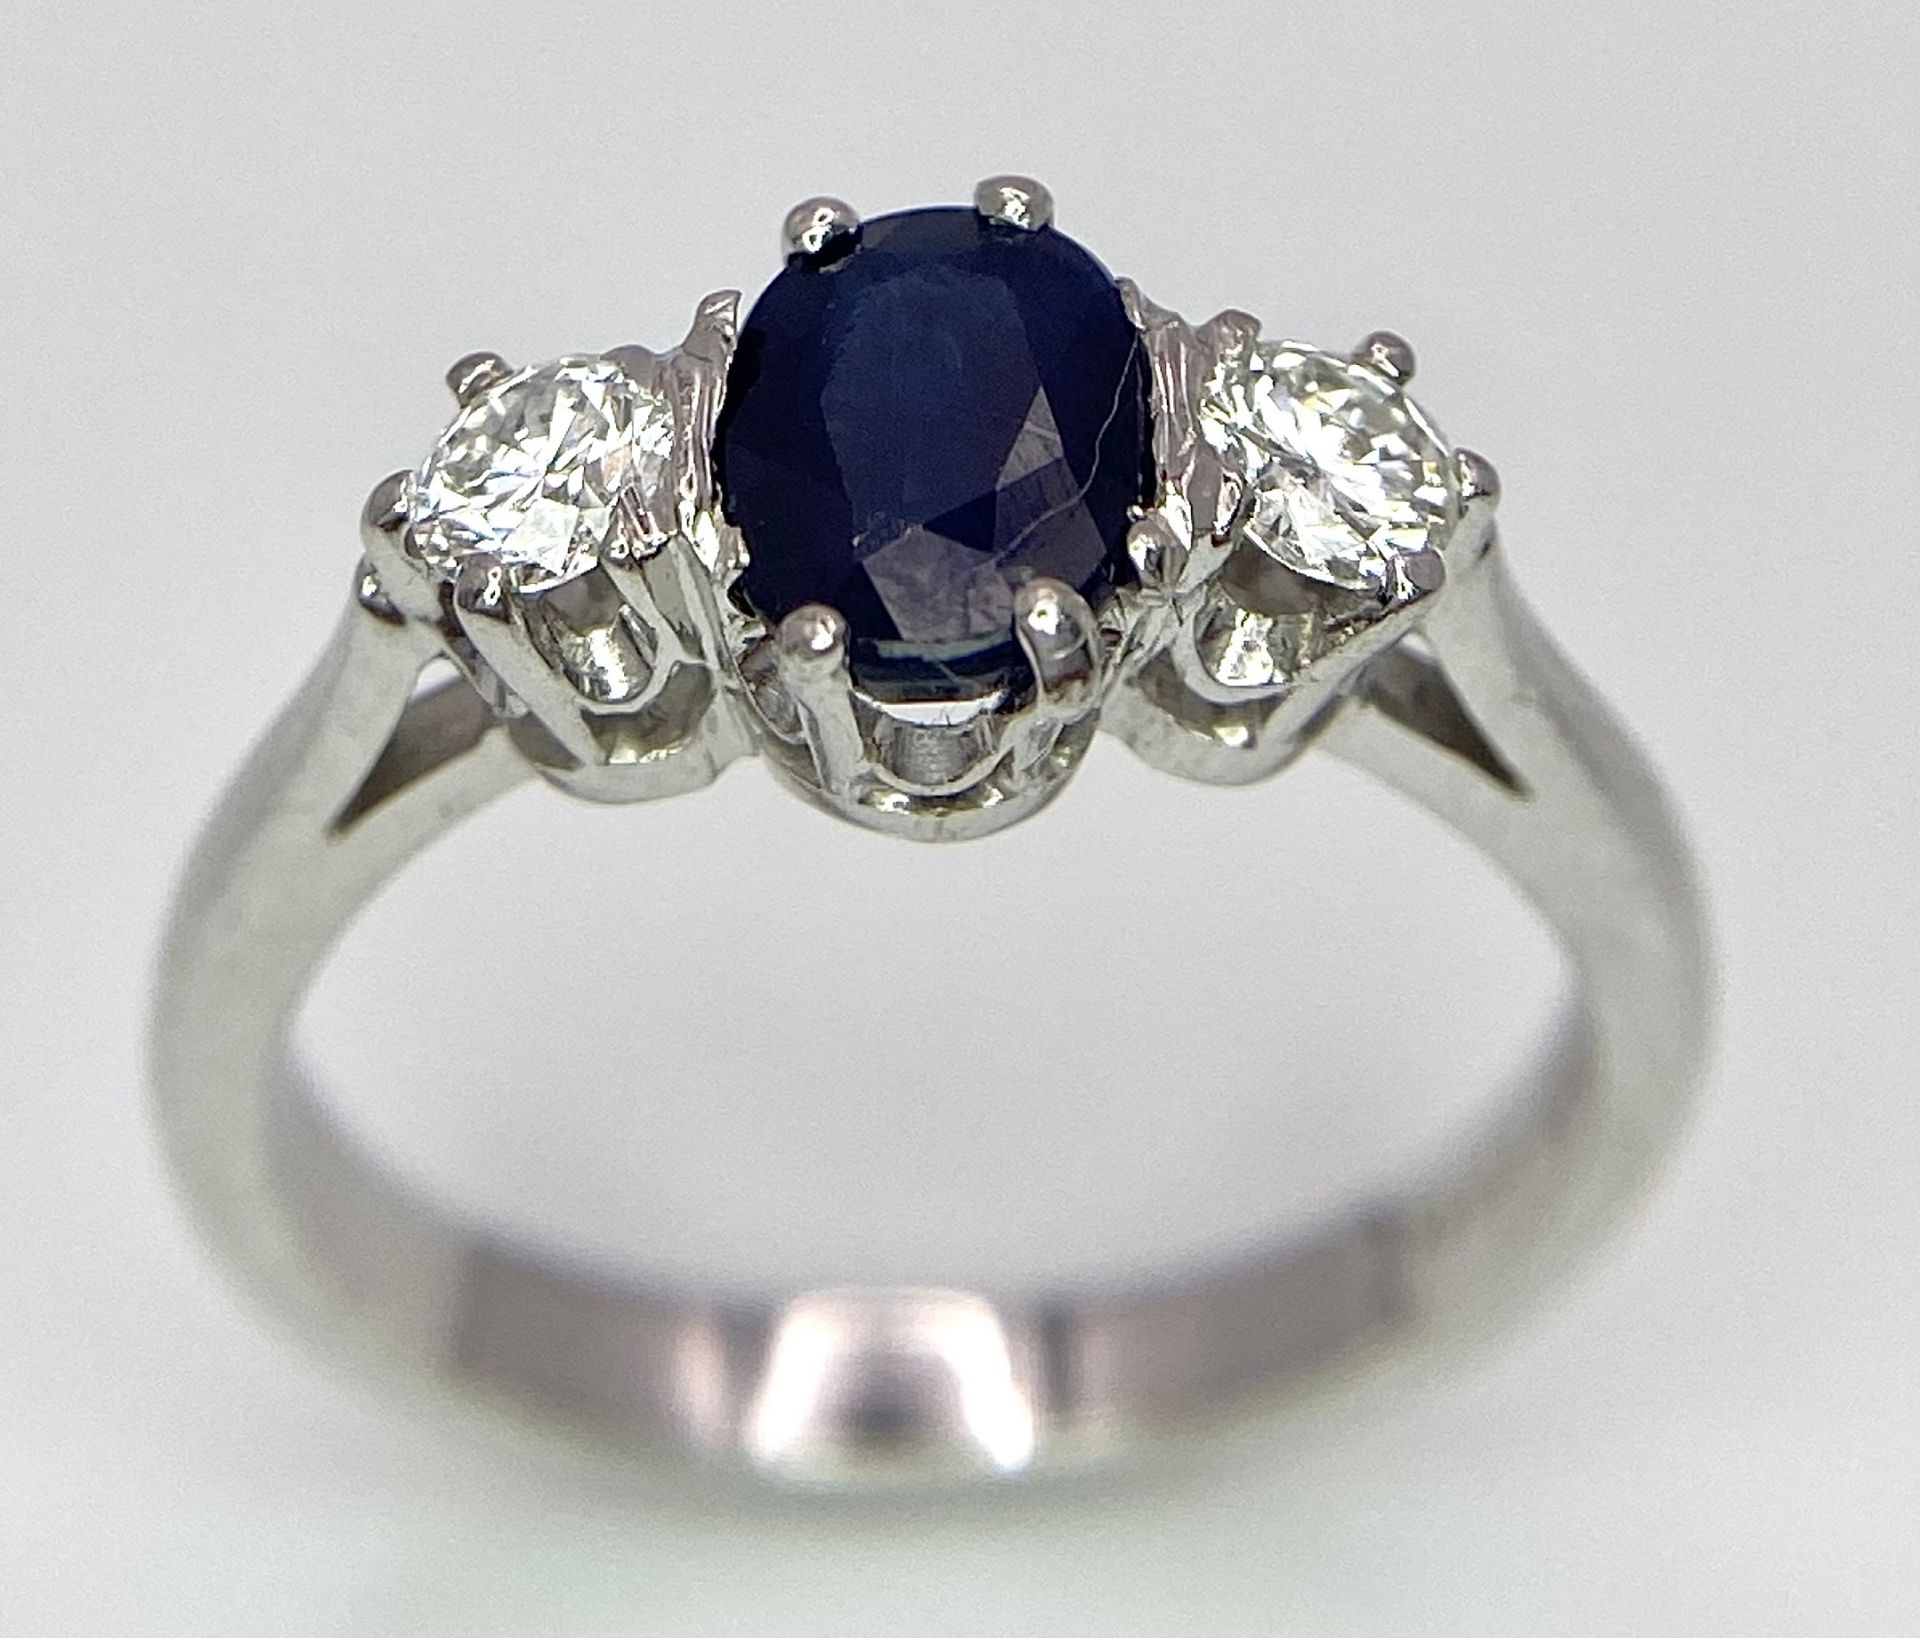 AN 18K WHITE GOLD, DIAMOND AND SAPPHIRE 3 STONE RING. OVAL BLUE SAPPHIRE - 0.75CT AND 0.30CT OF - Bild 3 aus 6